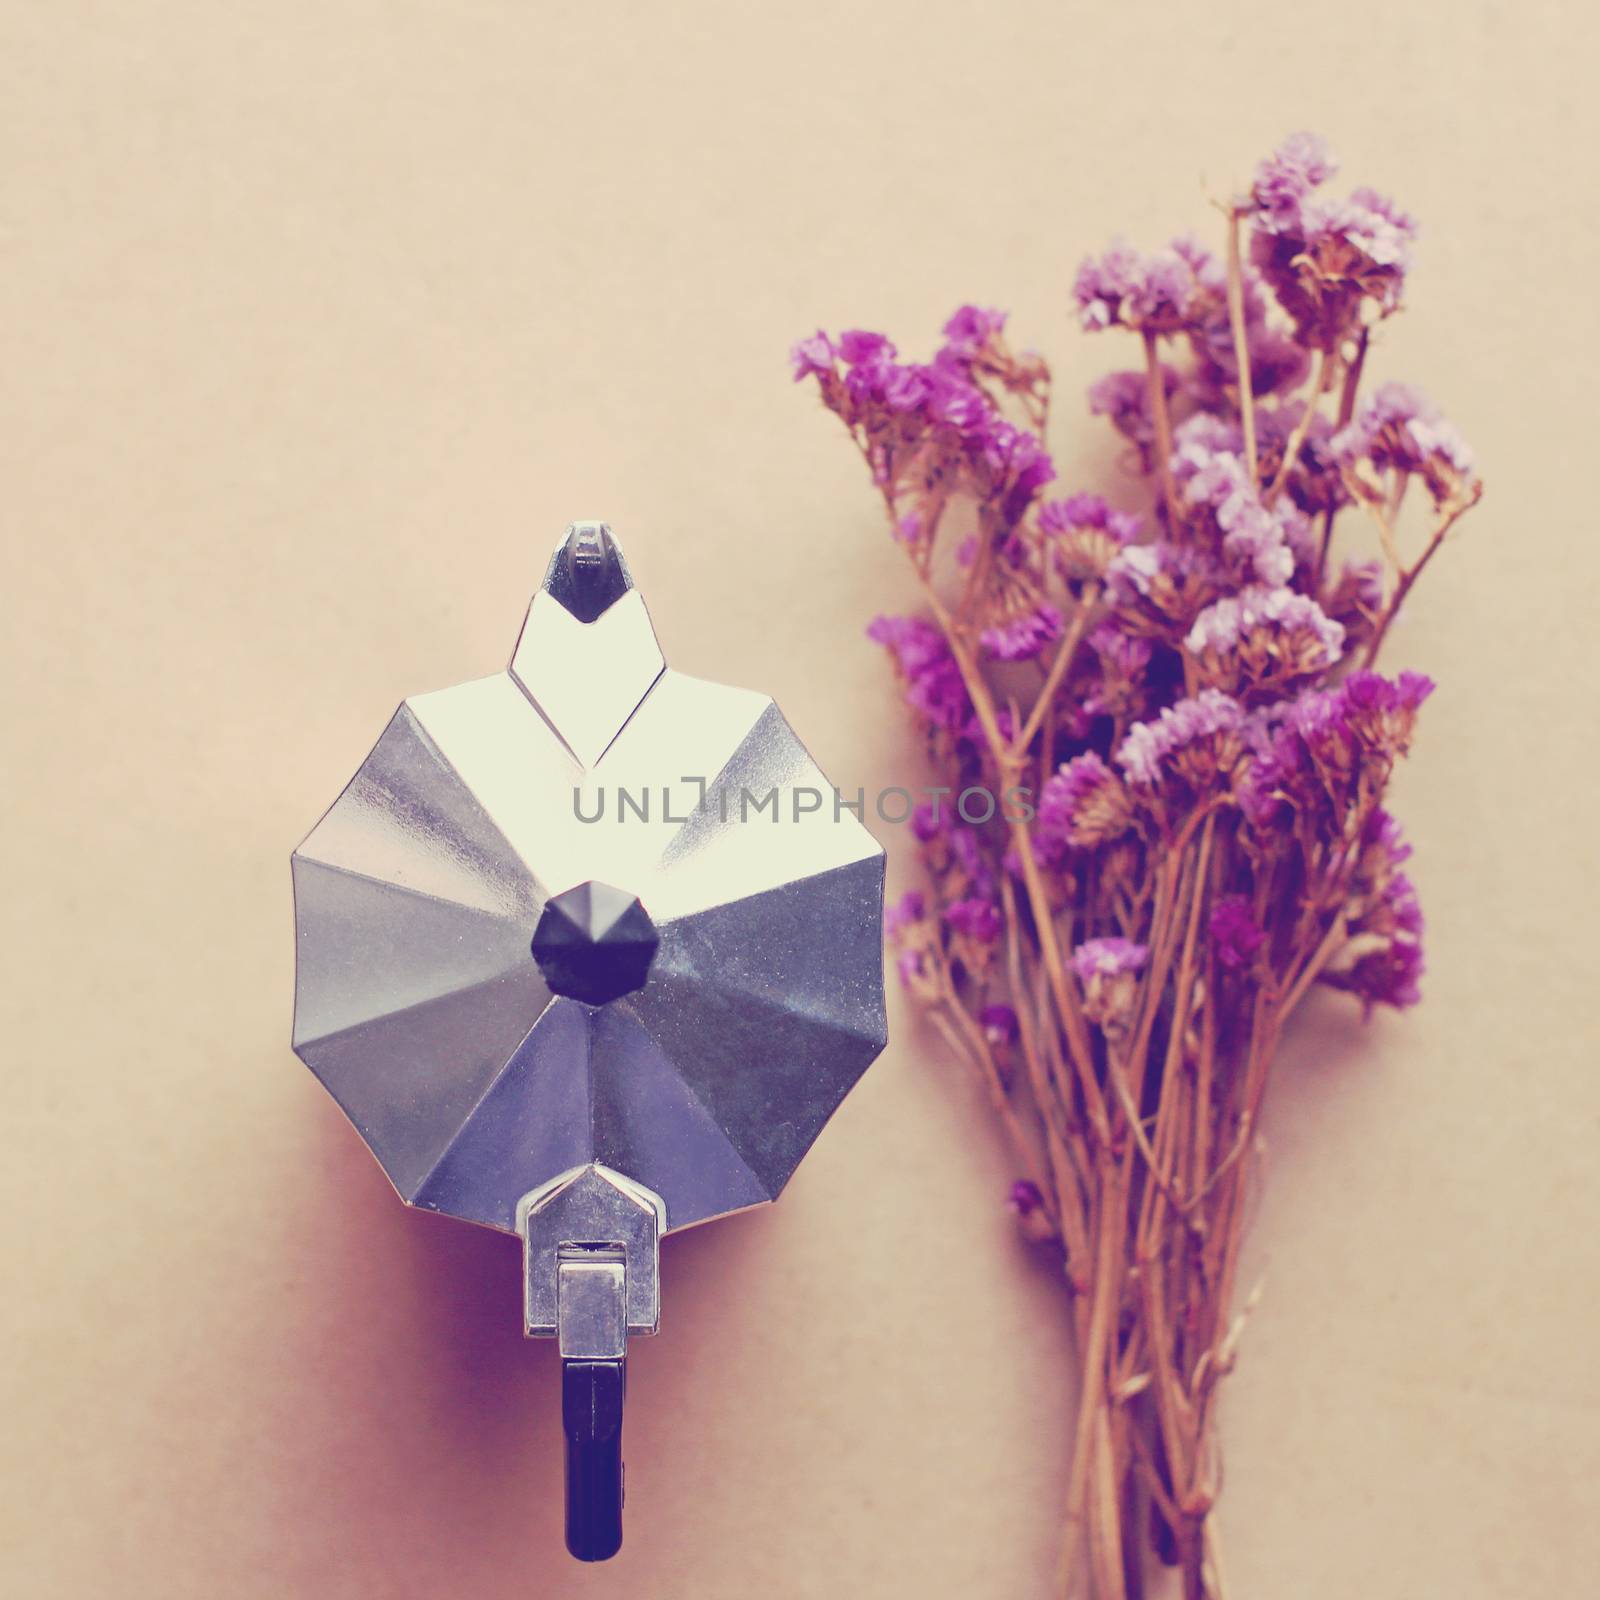 Italian coffee maker and flower with retro filter effect by nuchylee